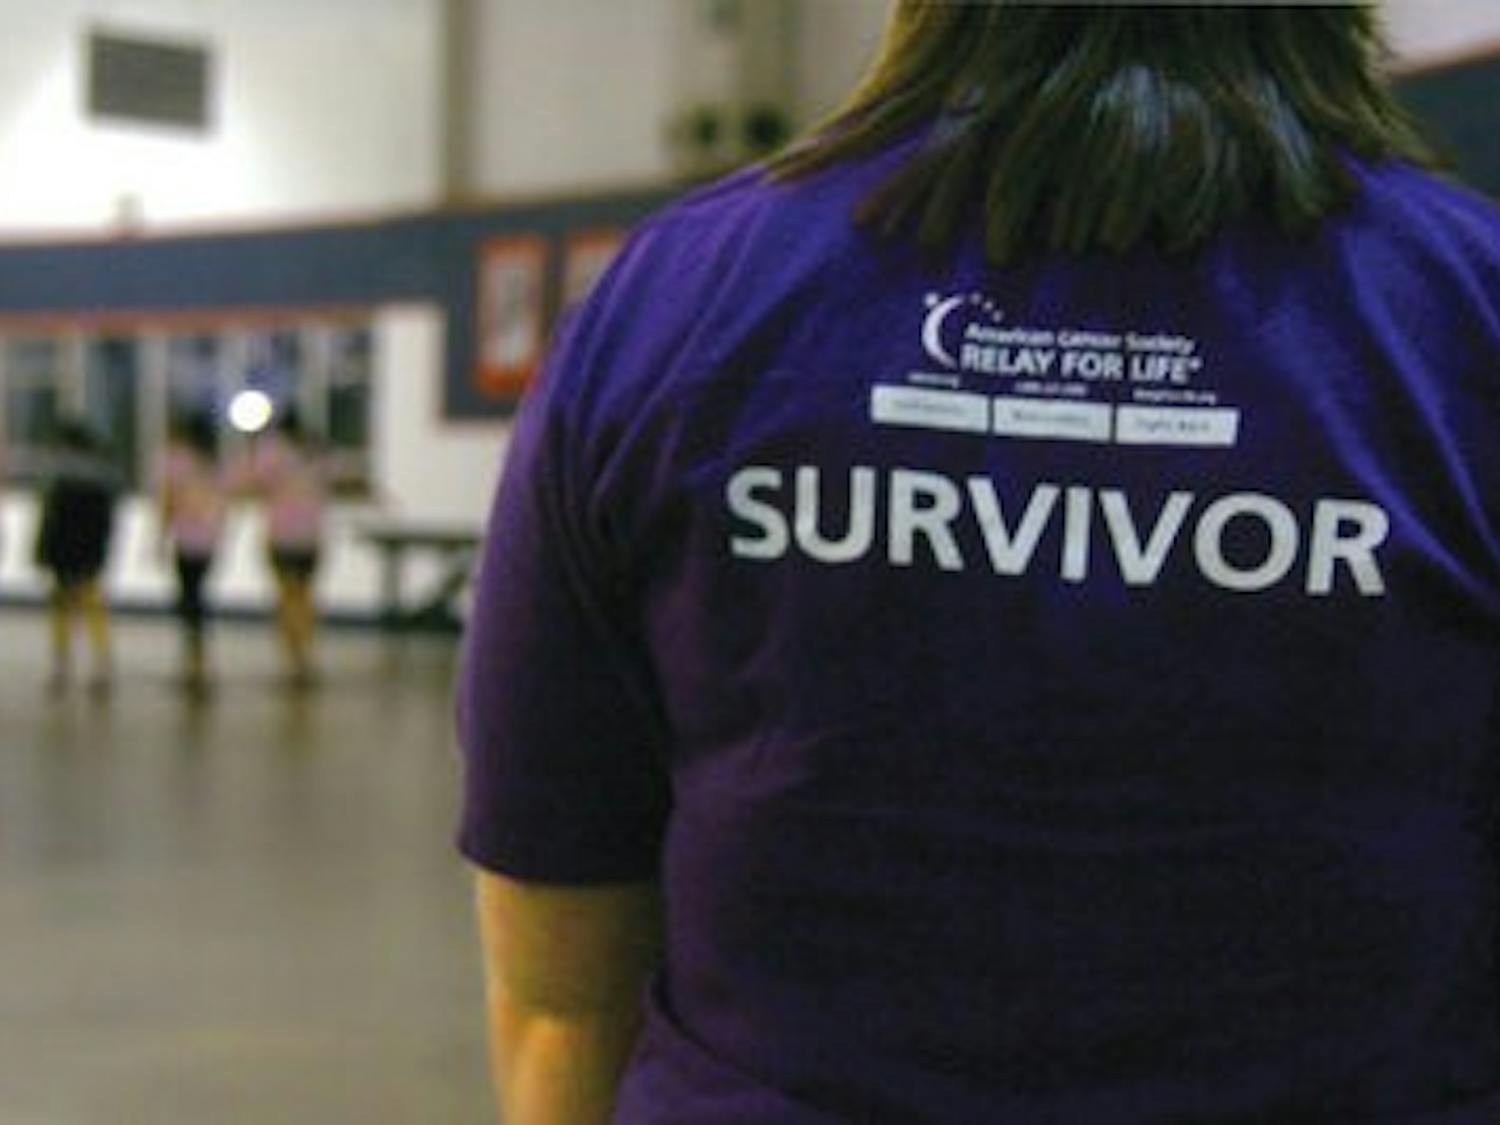 Collier's bright purple survivor shirt shows her victory over Hodgkin's lymphoma, a cancer that causes lymphatic cells to enlarge. (Rebekah weaver / Assistant photo editor)